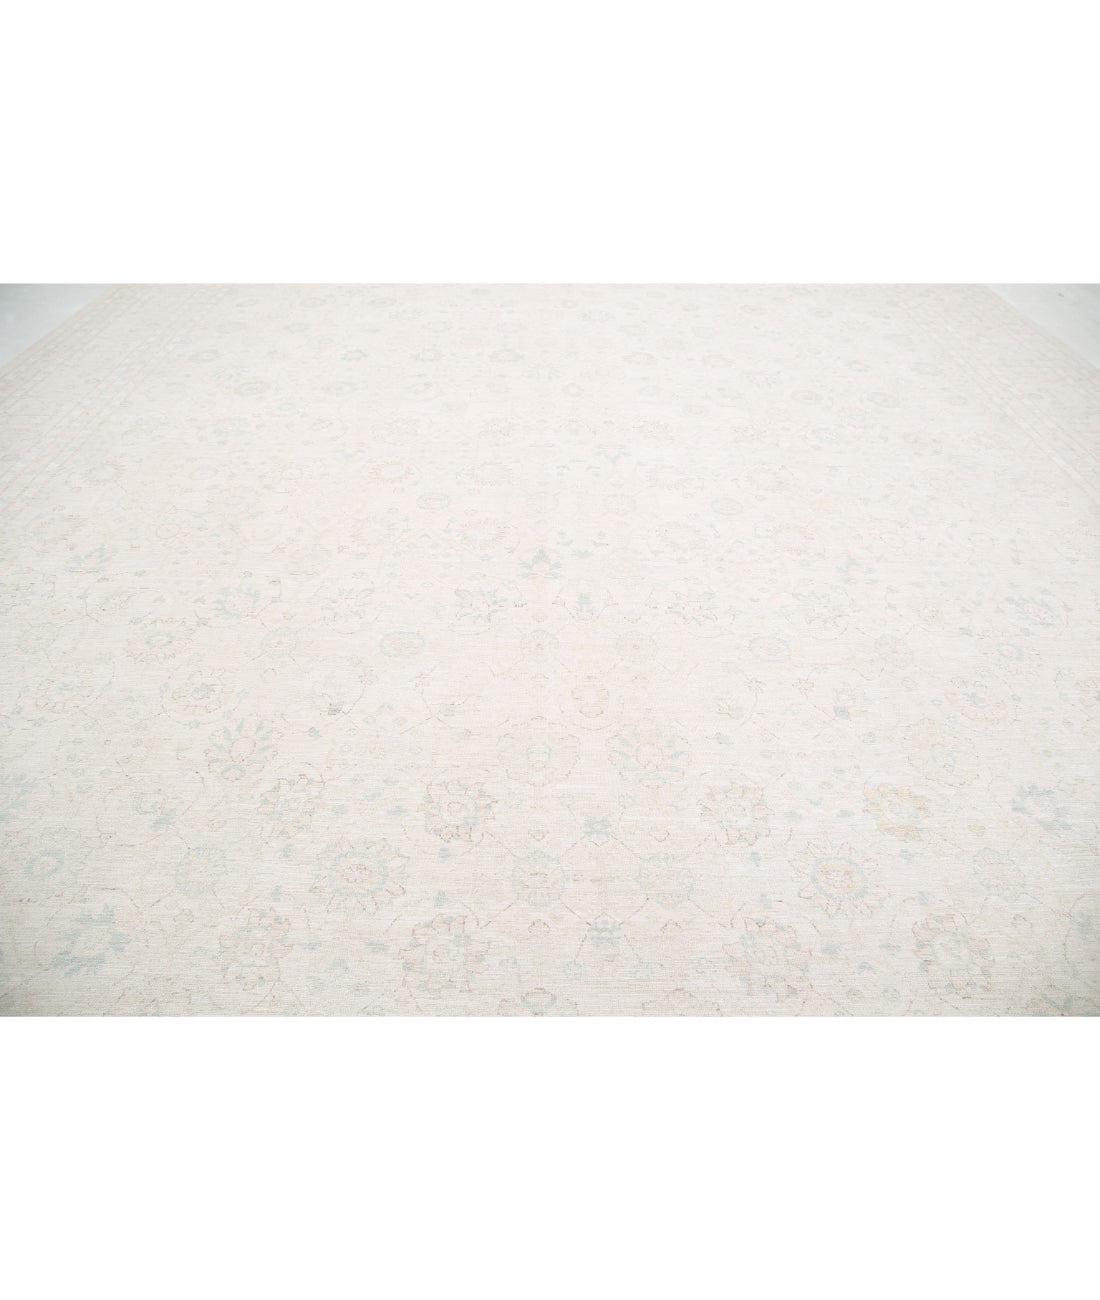 Serenity 17'0'' X 23'0'' Hand-Knotted Wool Rug 17'0'' x 23'0'' (510 X 690) / Blue / Ivory